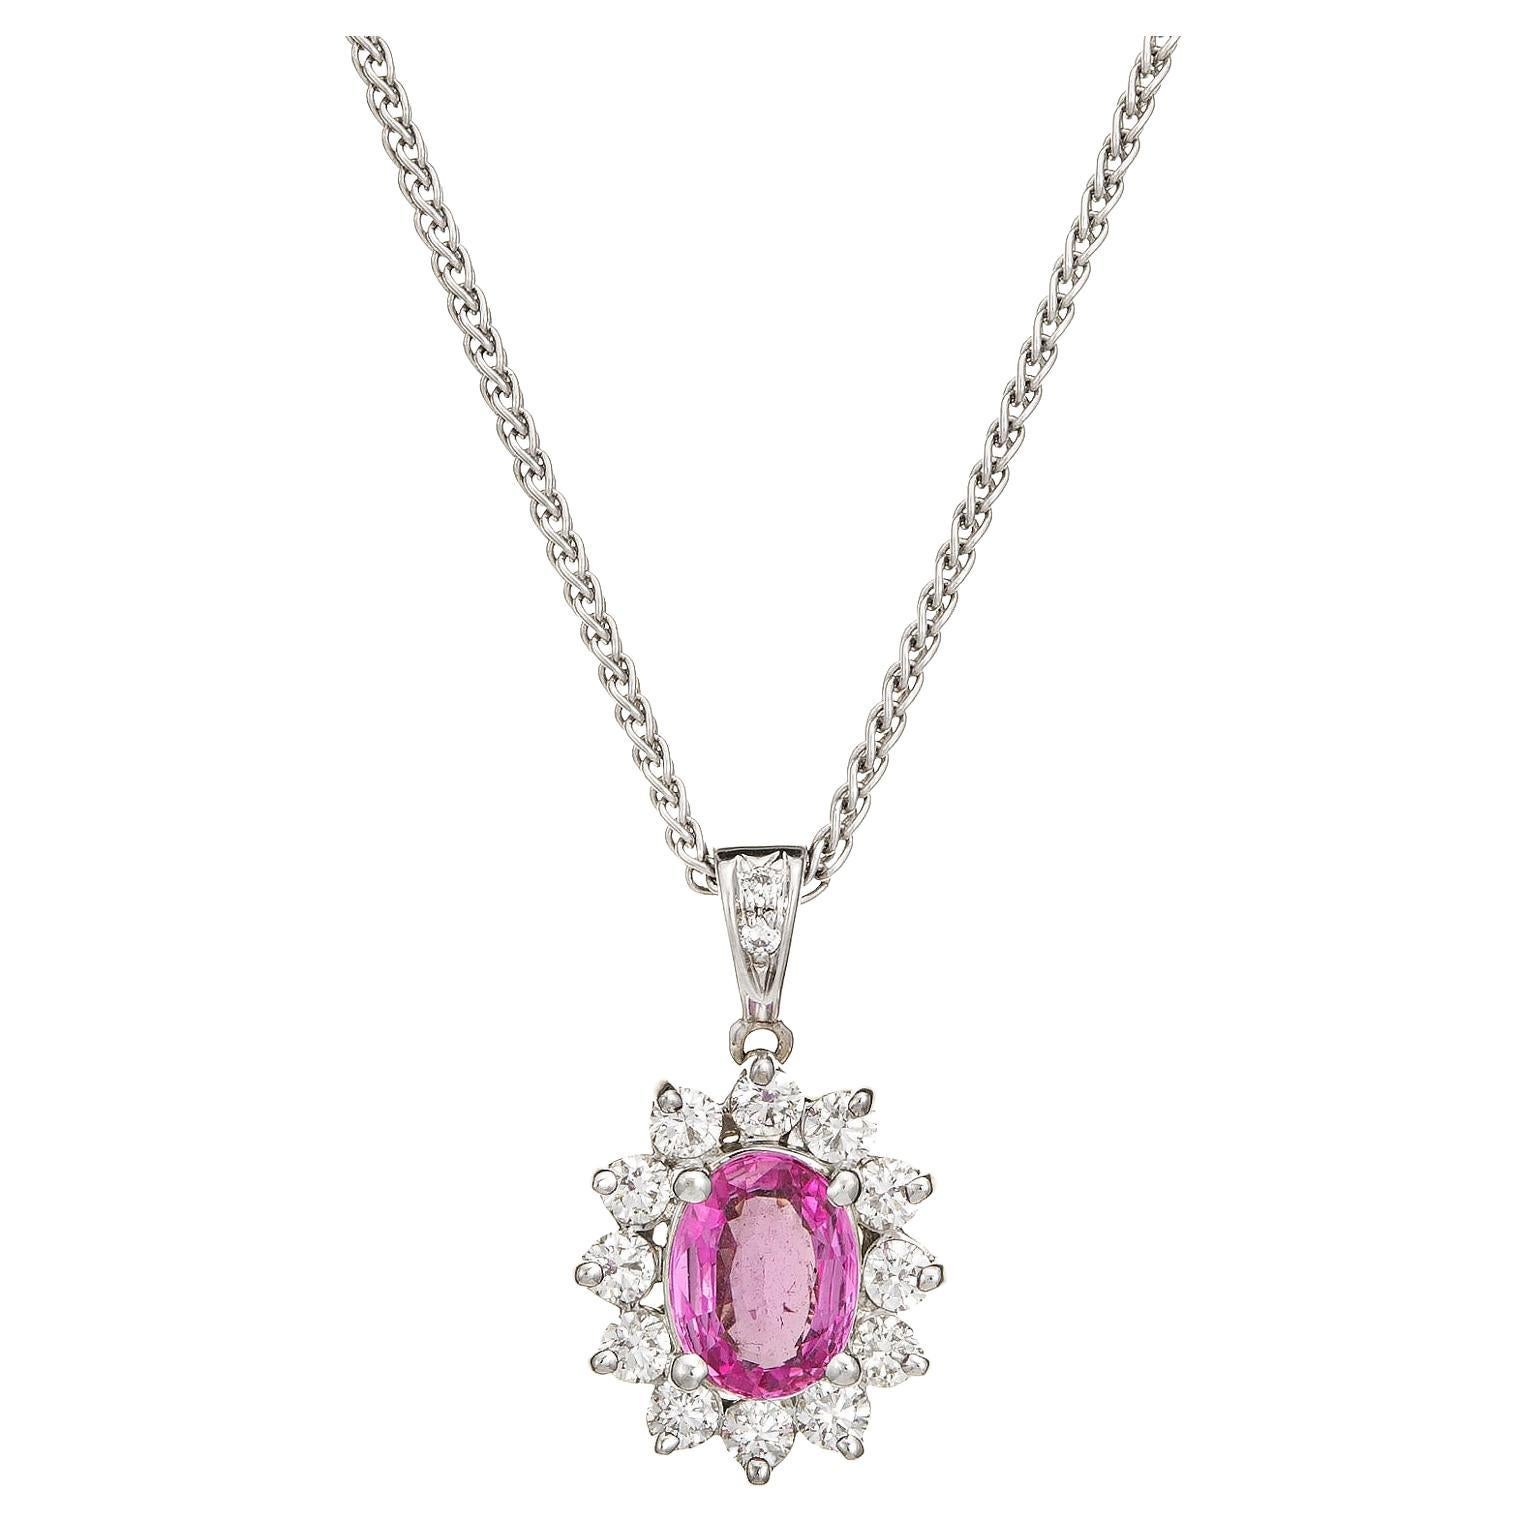 No Heat Natural Pink Sapphire Diamond Necklace 18k White Gold Vintage Jewelry